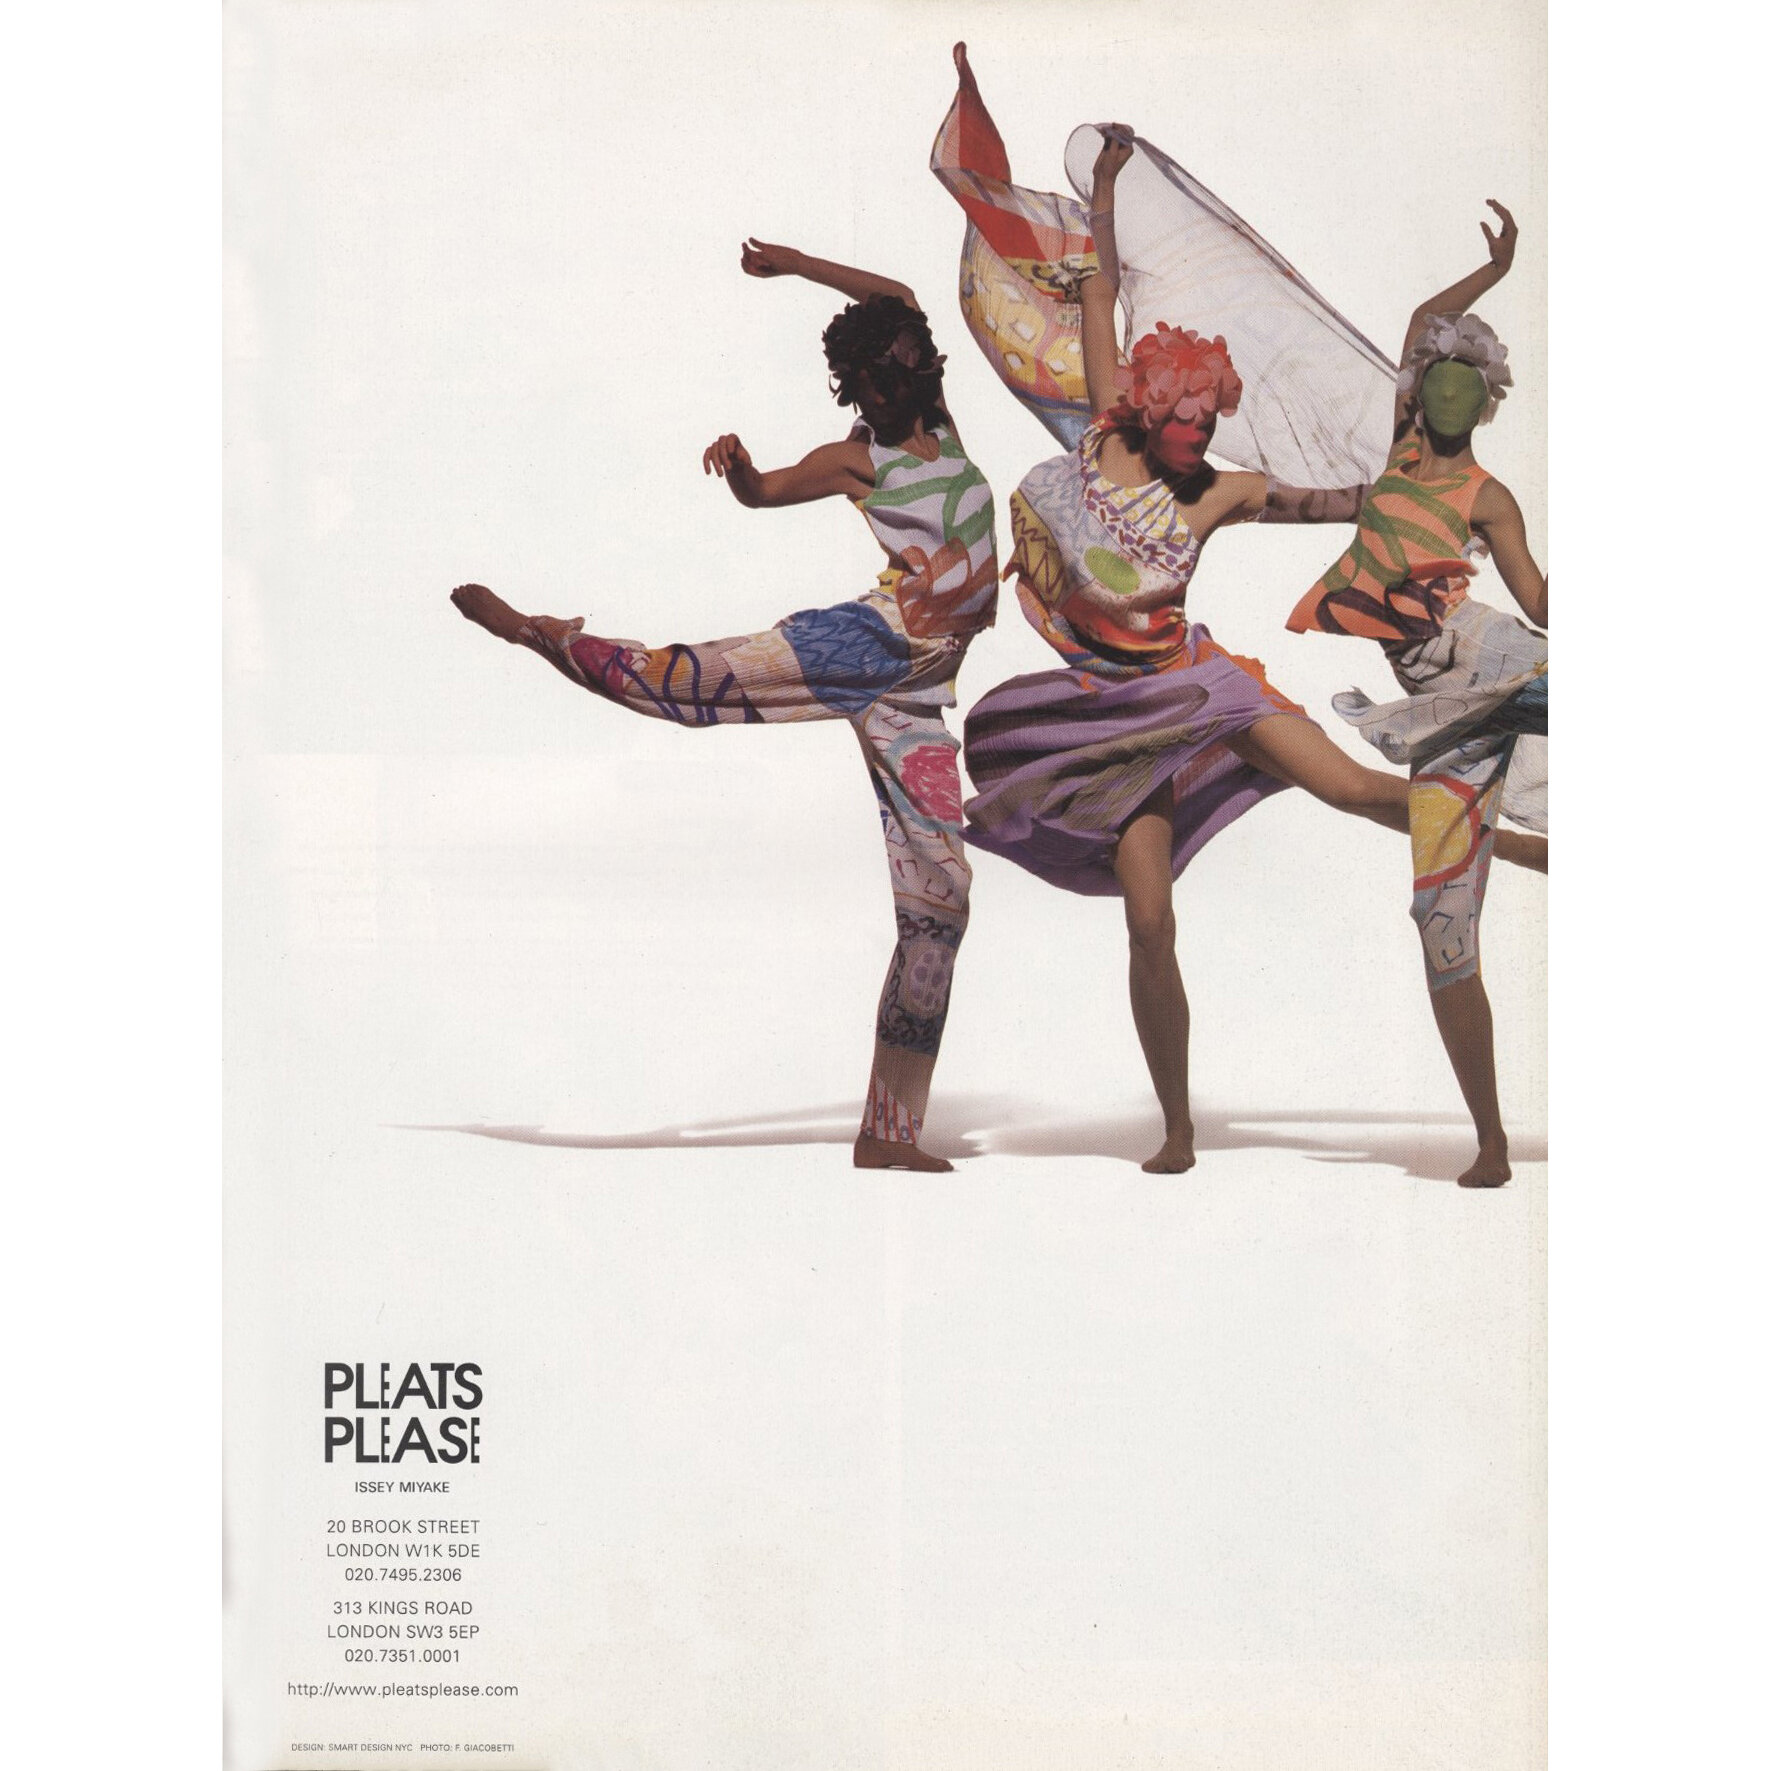 pleats-please-issey-miyake-ad-photography-francis-giacobetti-i-d-the-renaissance-issue-no-207-march-2001-1690_o.jpg